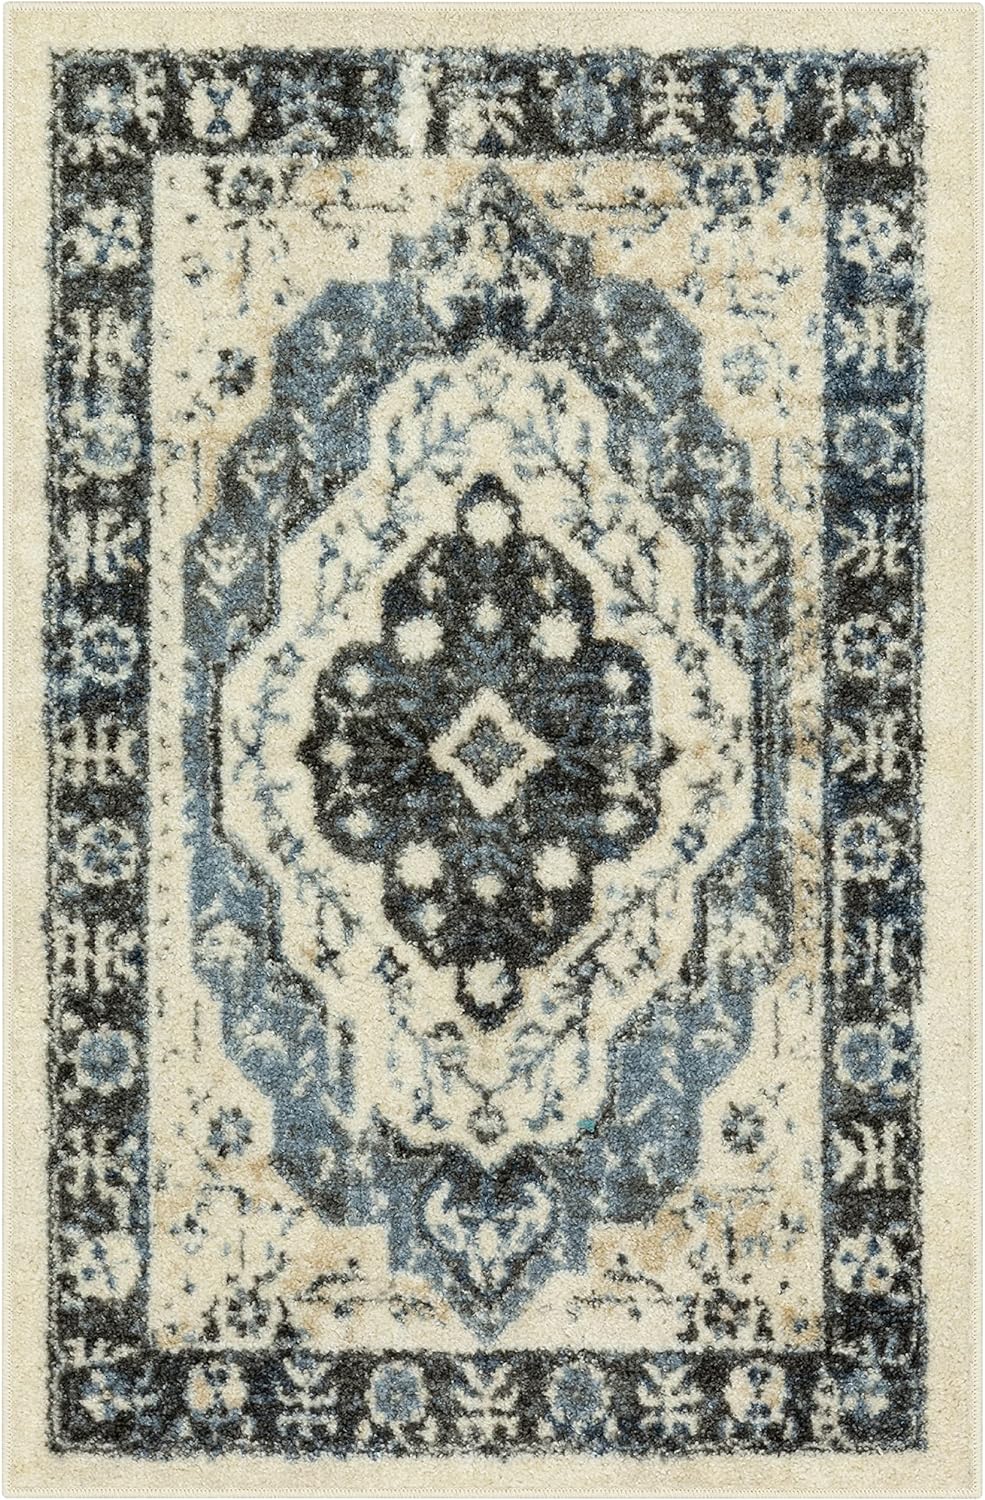 Maples Rugs Caprice Boho Medallion Trellis Kitchen Rugs Non Skid Accent Area Carpet [Made in USA], Neutral/Blue, 2'6 x 3'10